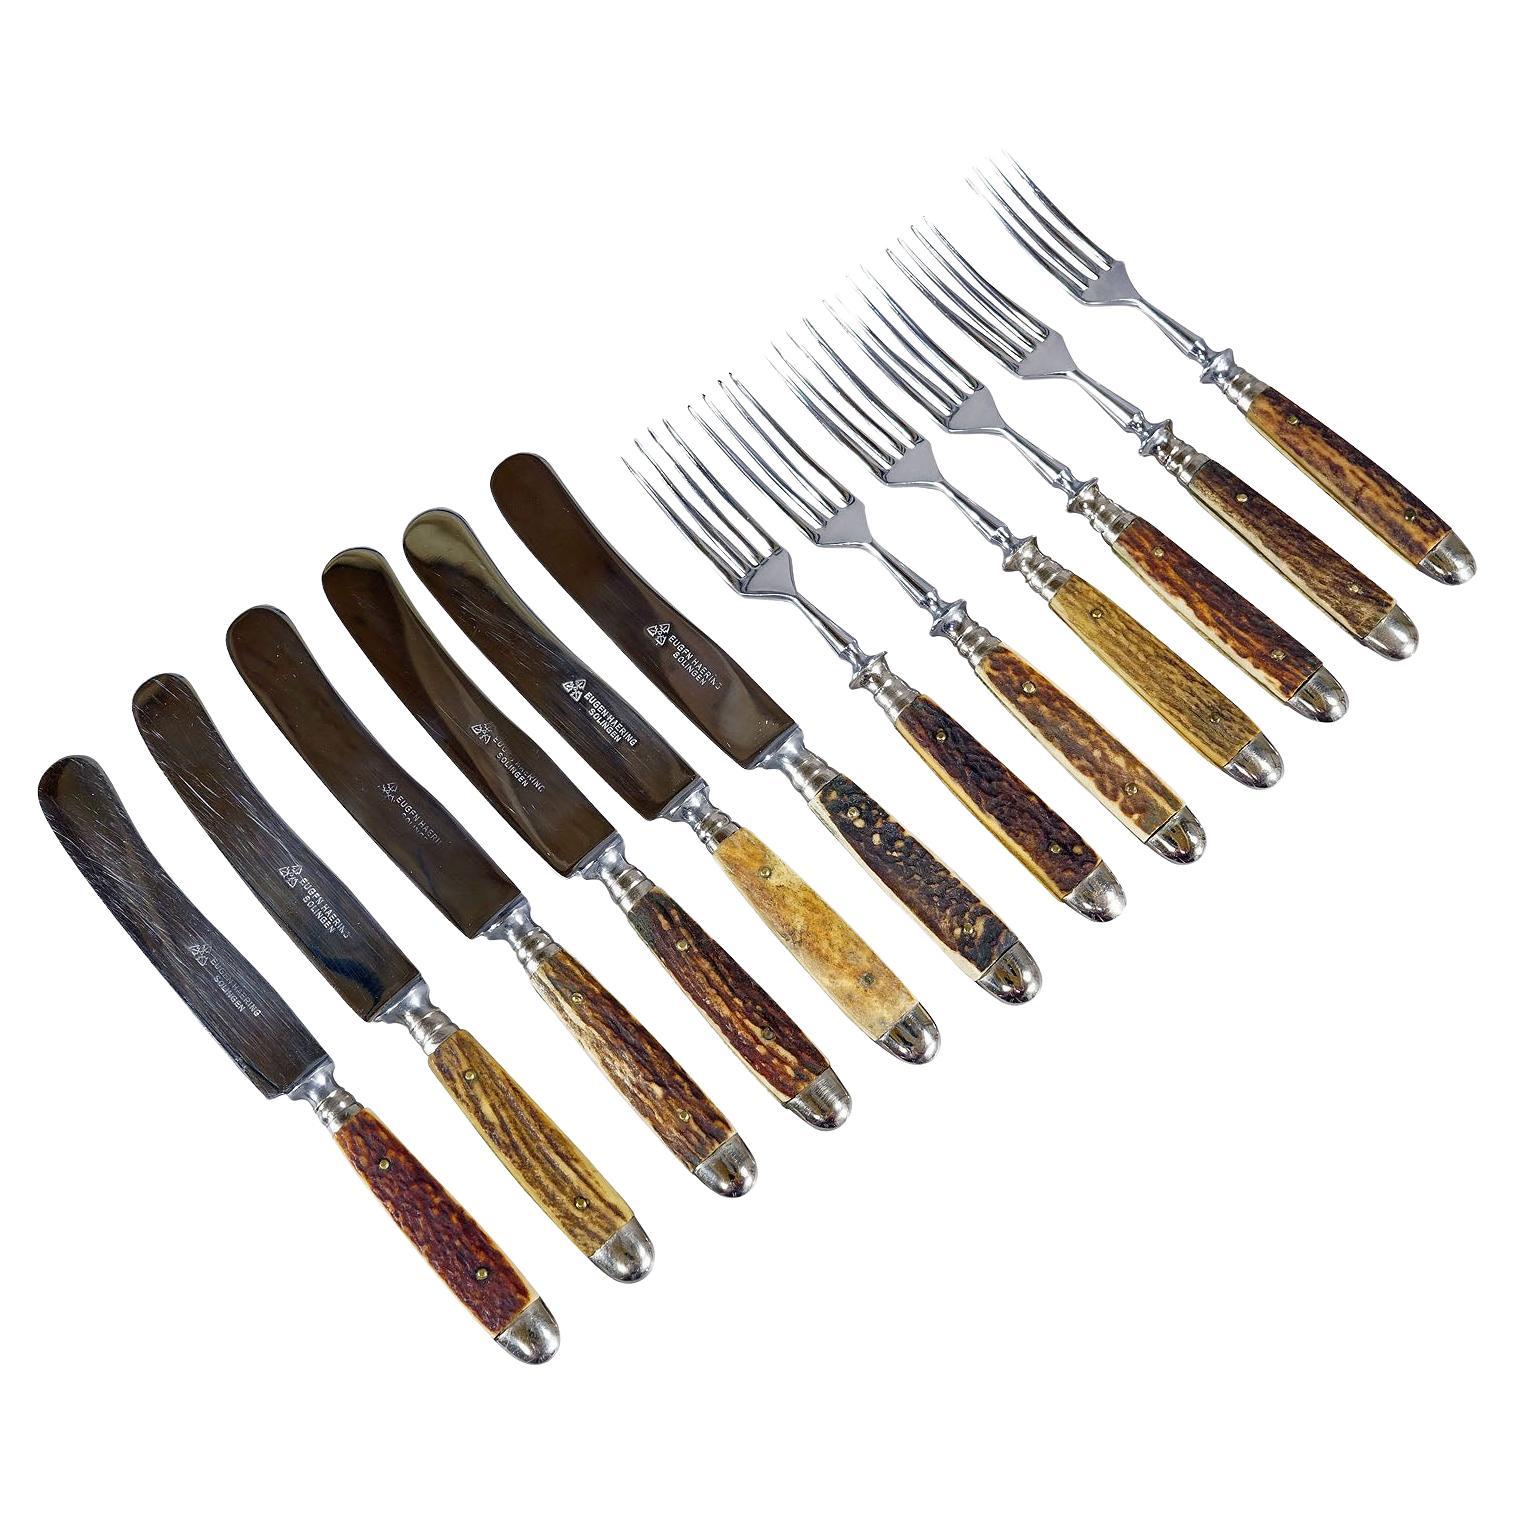 Antique Stainless Steel and Horn 12 Pieces Tableware Set, Germany 1930s